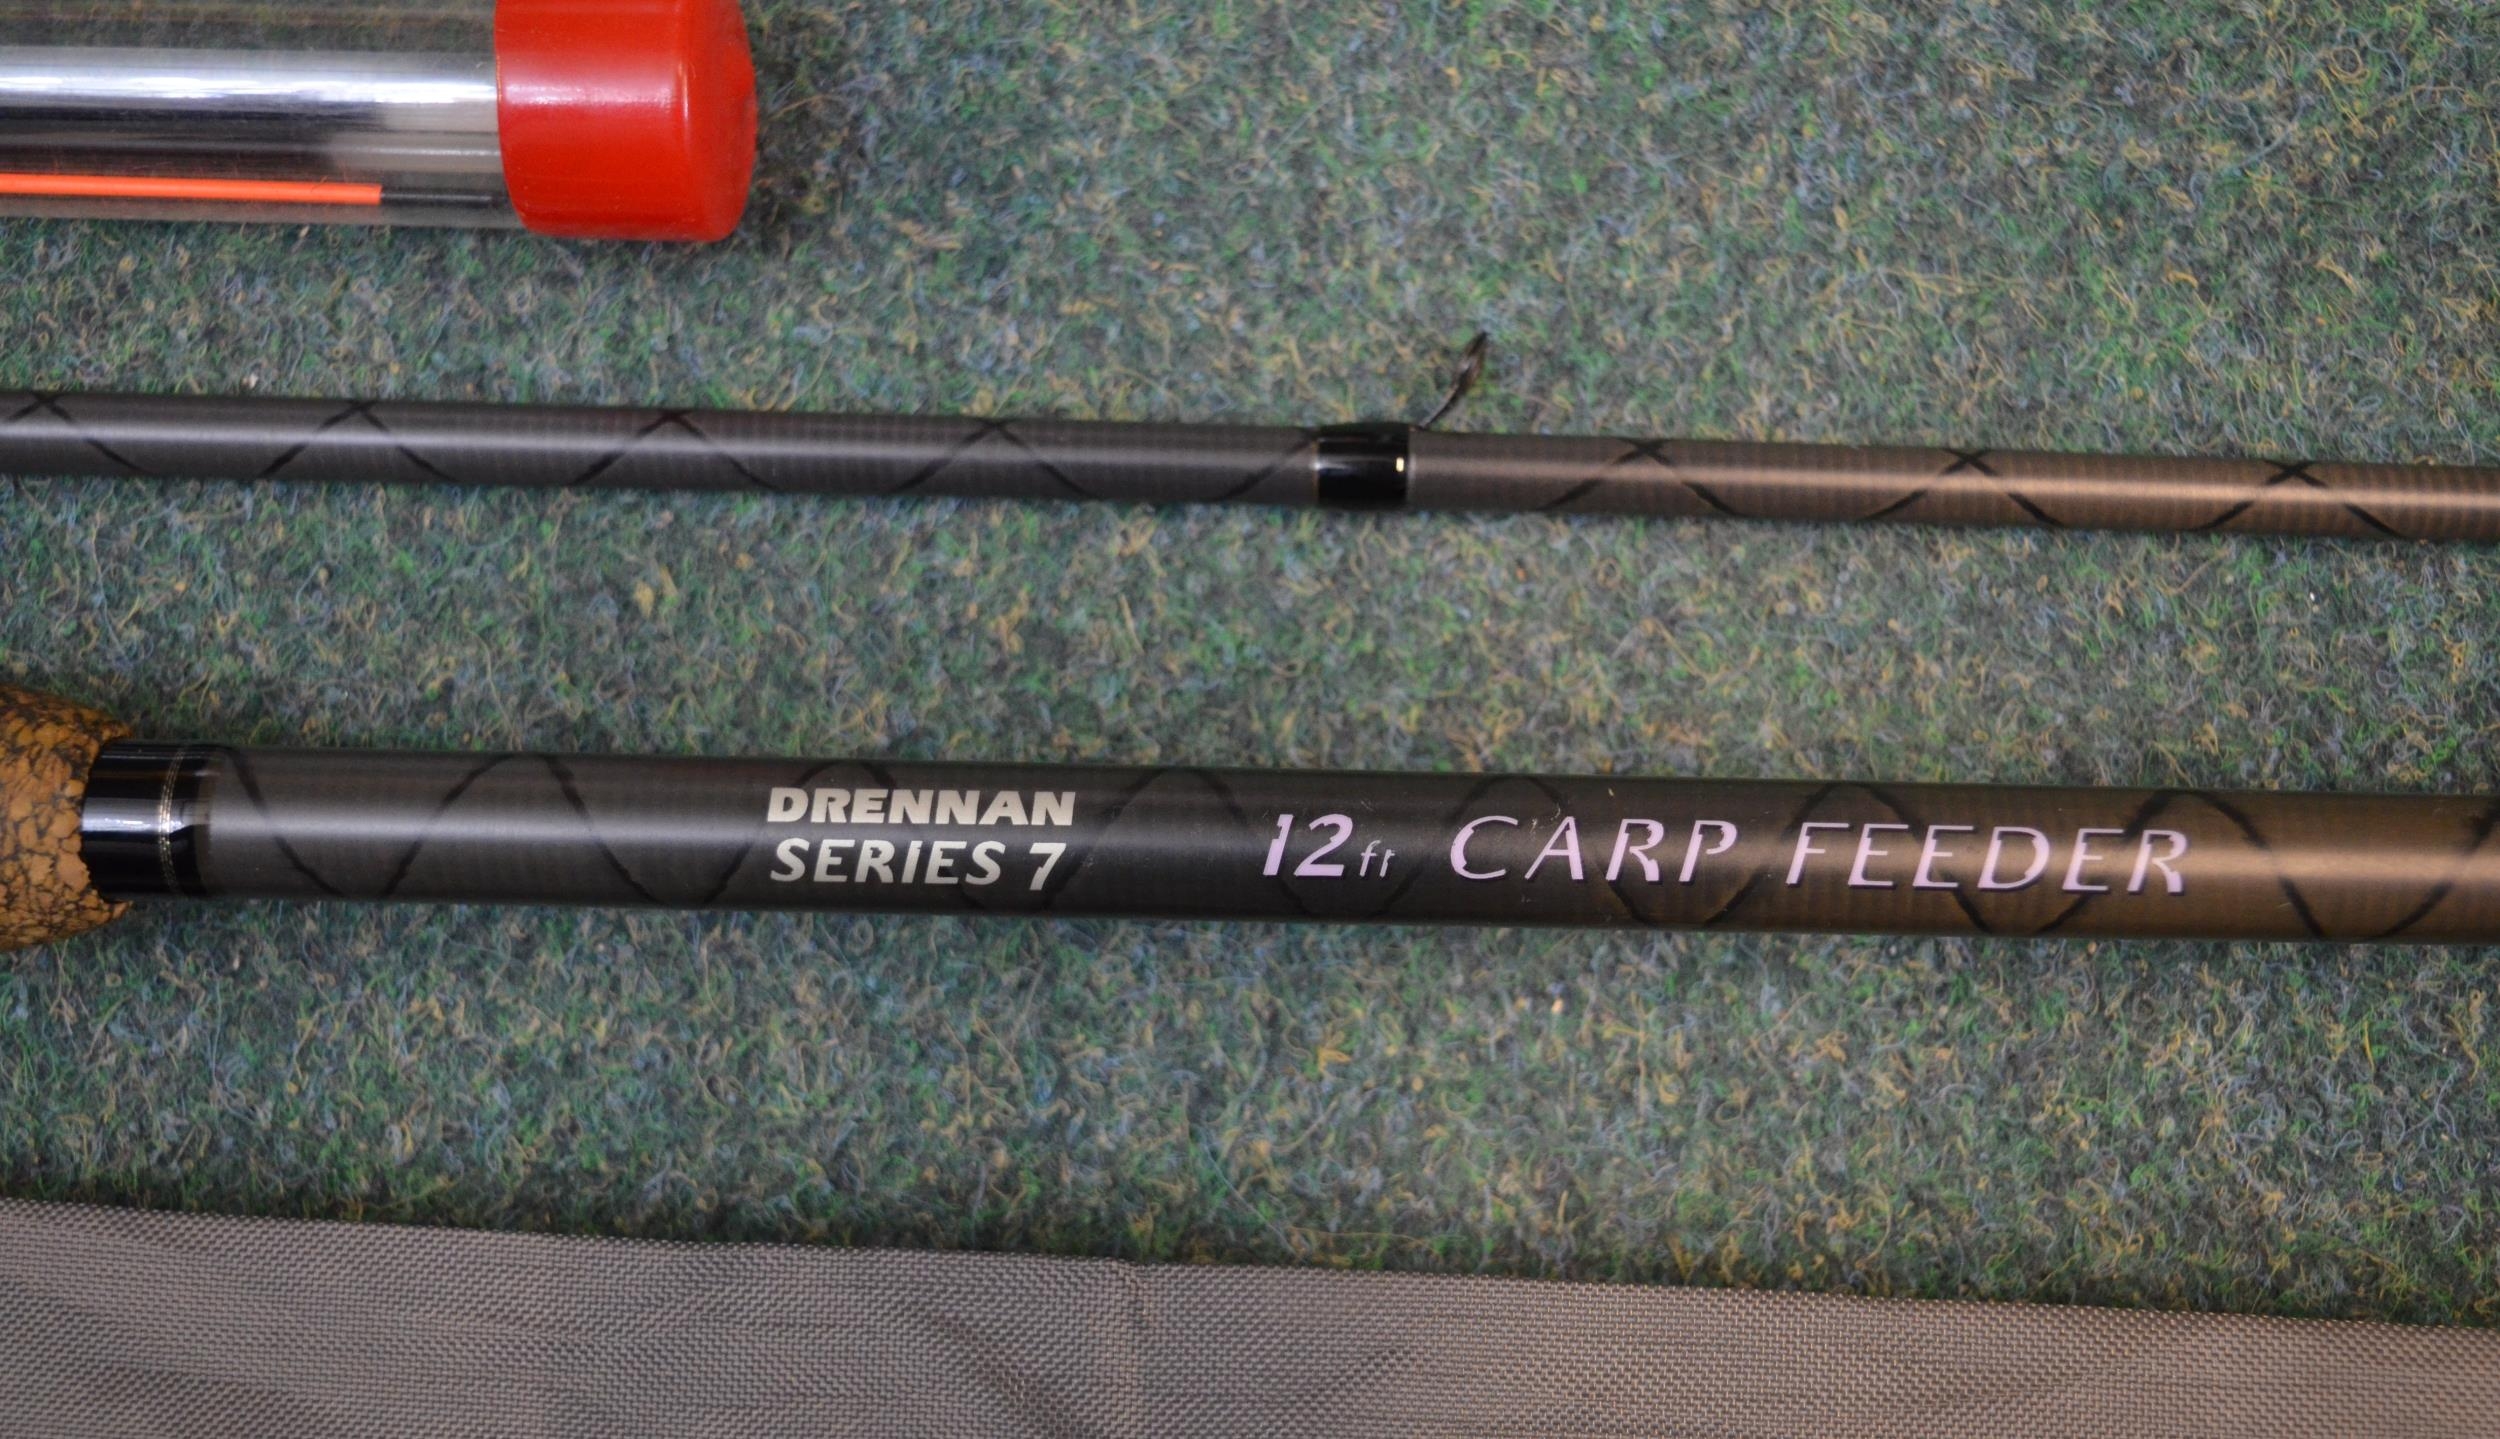 Lightly used Drennan series 7, 12ft carp feeder fishing rod with 3 quiver tips - Image 5 of 8